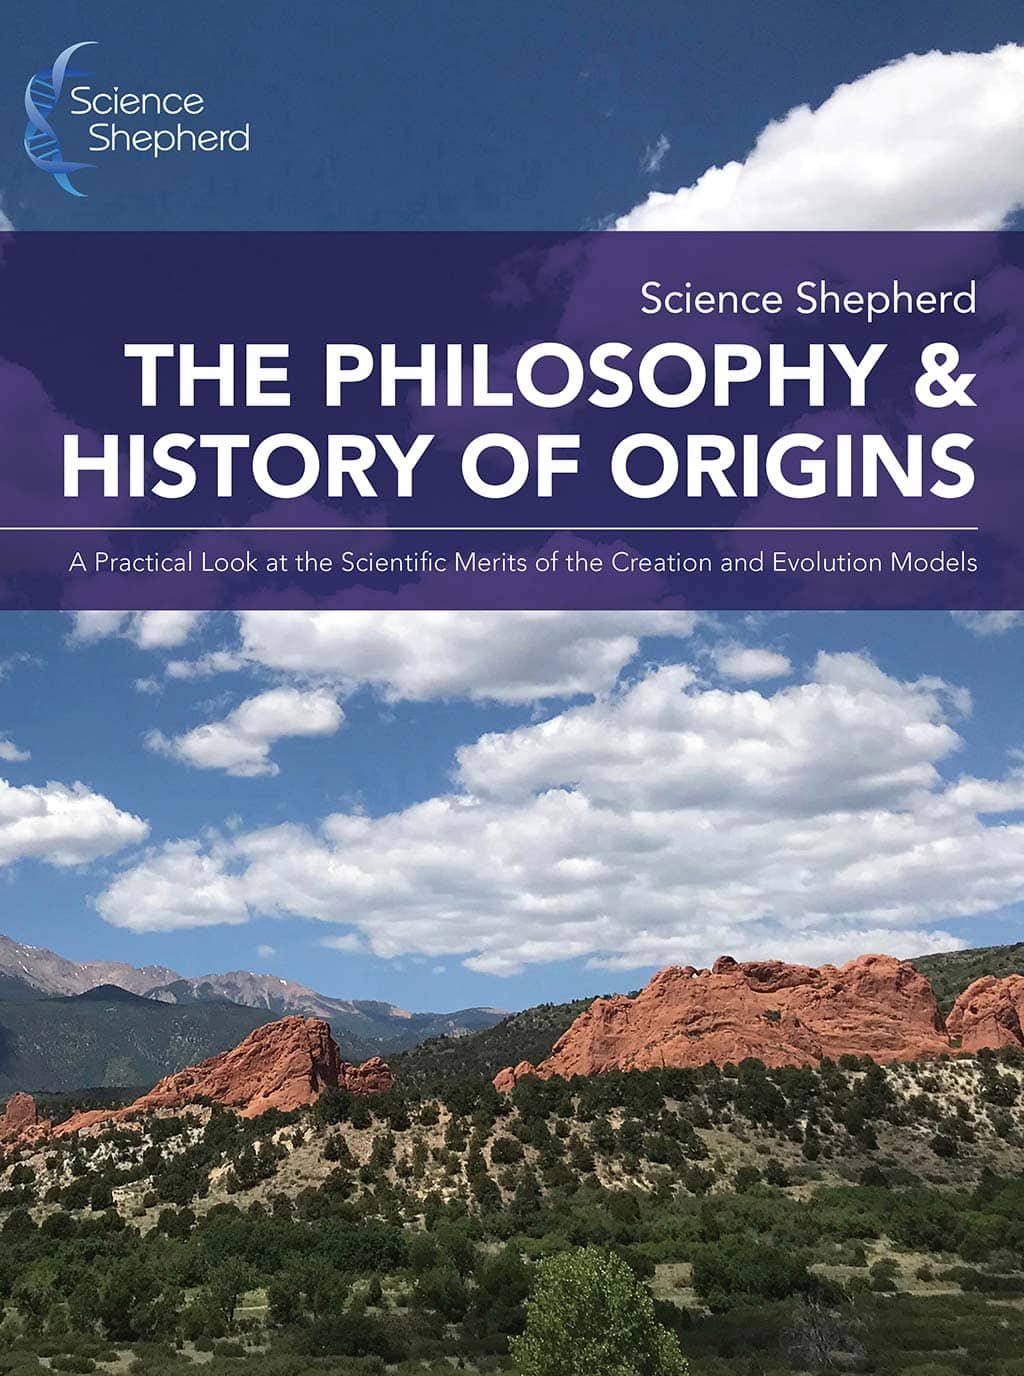 The Philosophy &amp; History of Origins creation science and evolution book cover of a rocky landscape